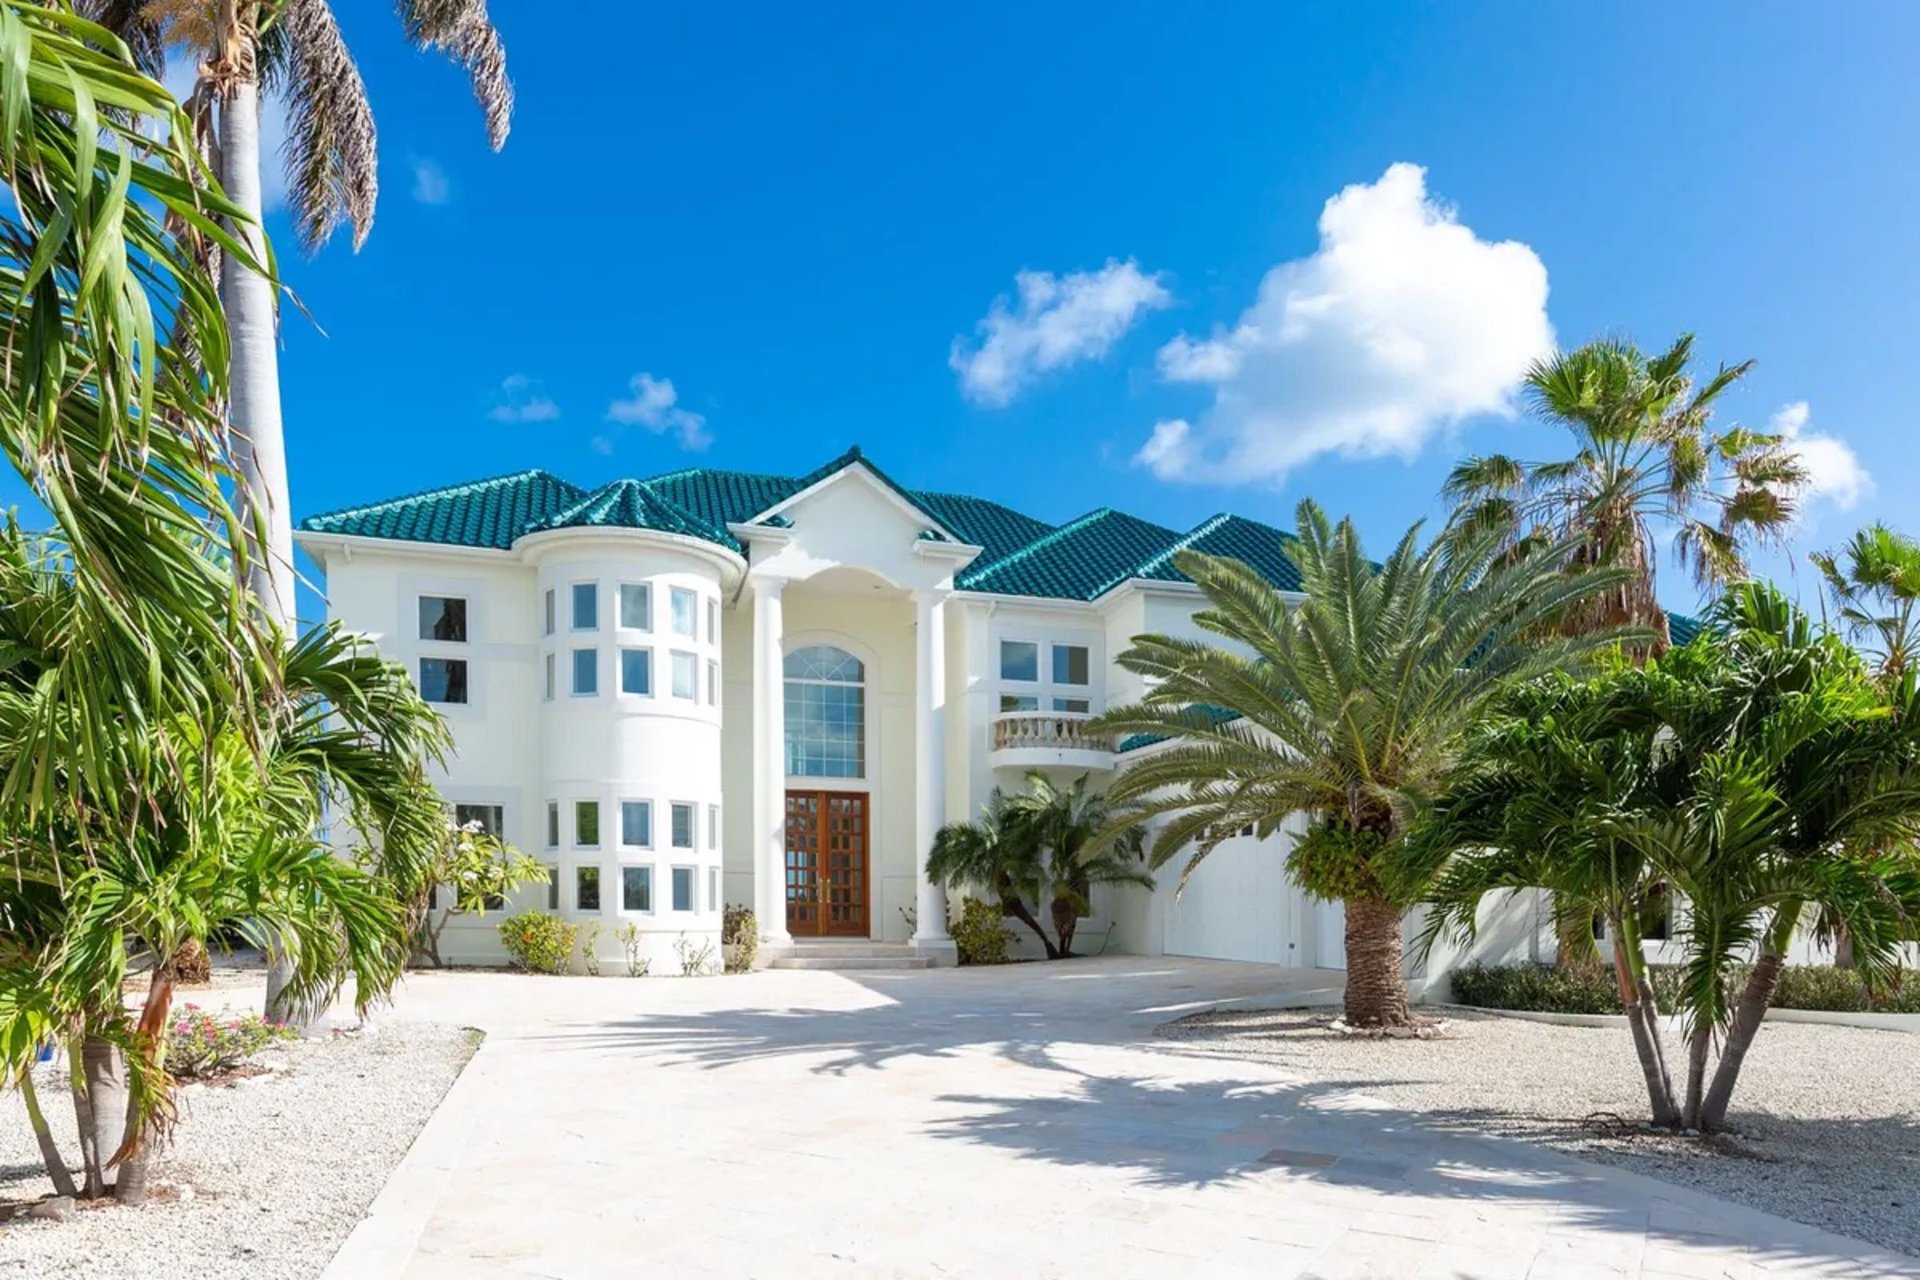 Exquisite 7 BR In Royal Bluff Residence, East End, Grand Cayman, Cayman Islands, picture 1